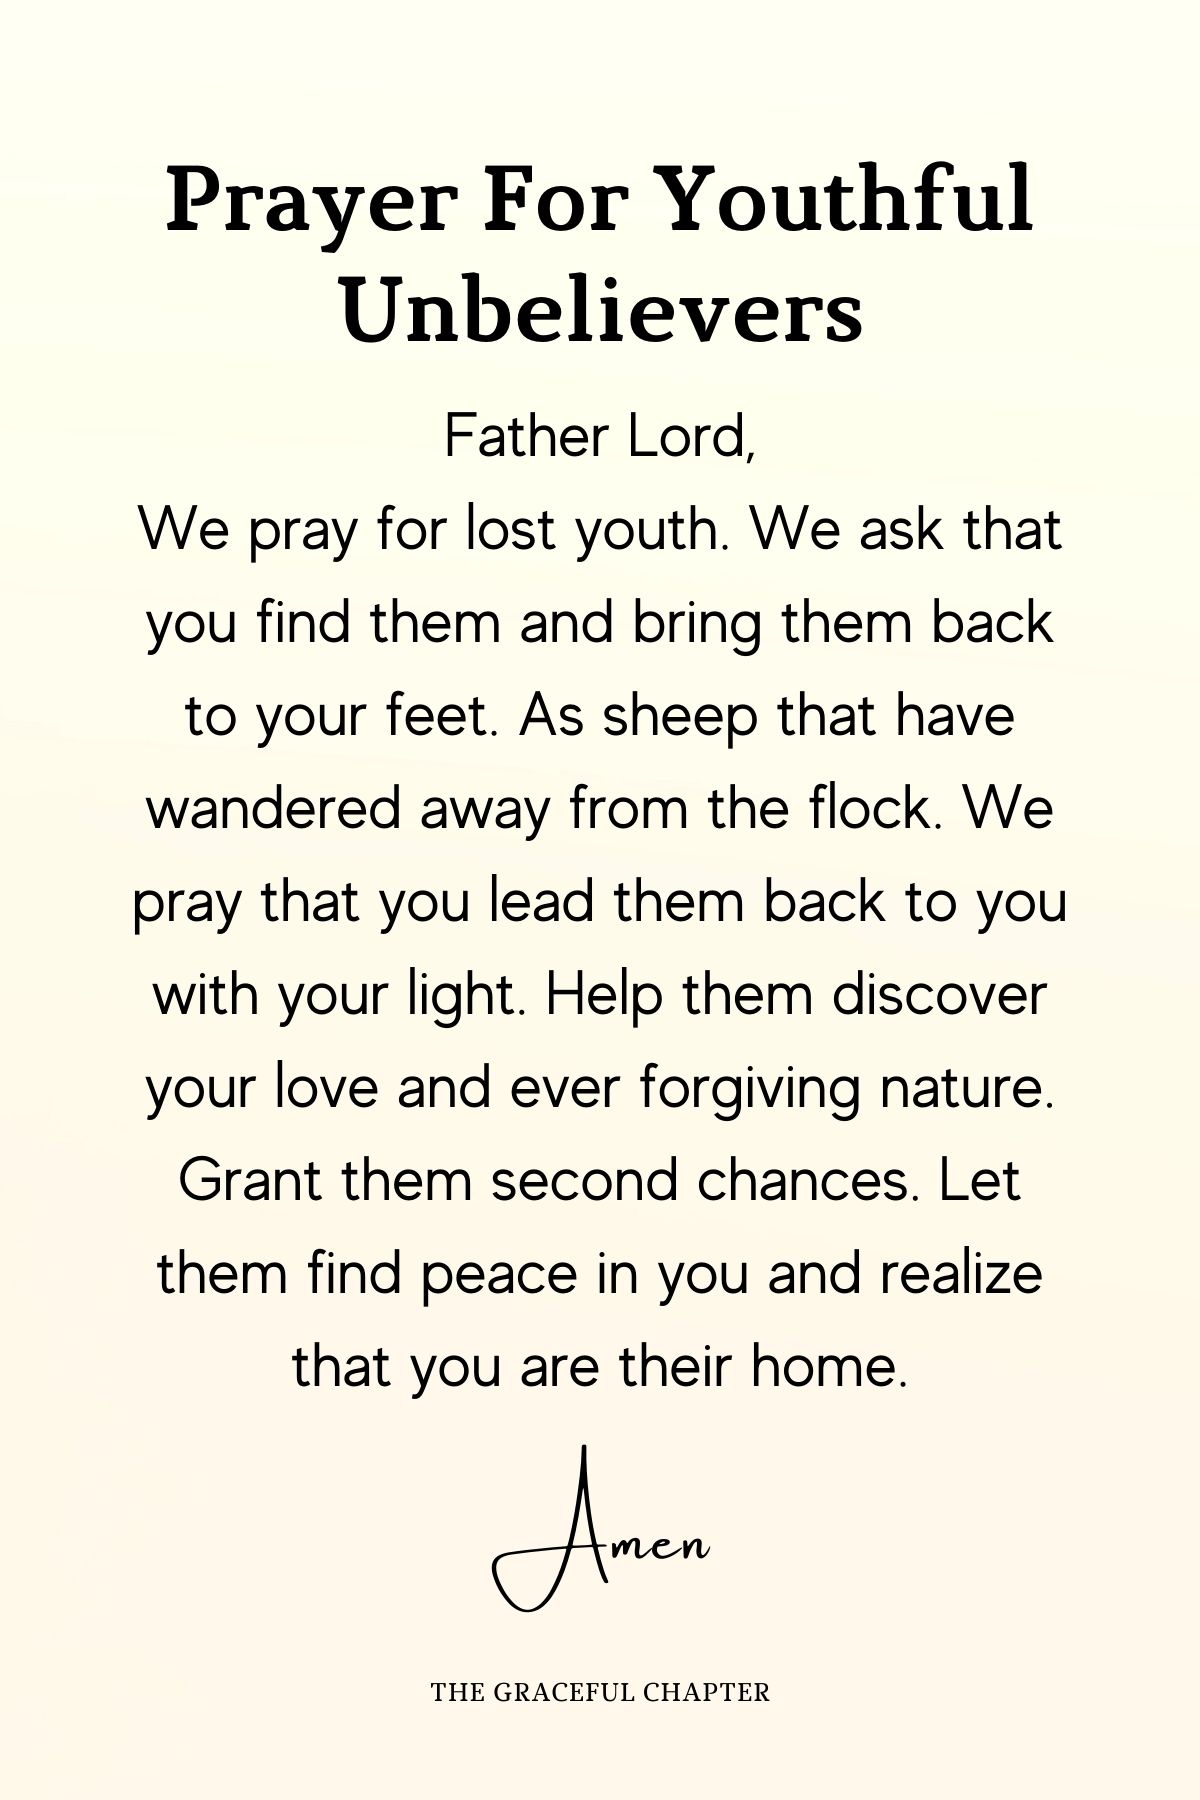 Prayer for youthful unbelievers